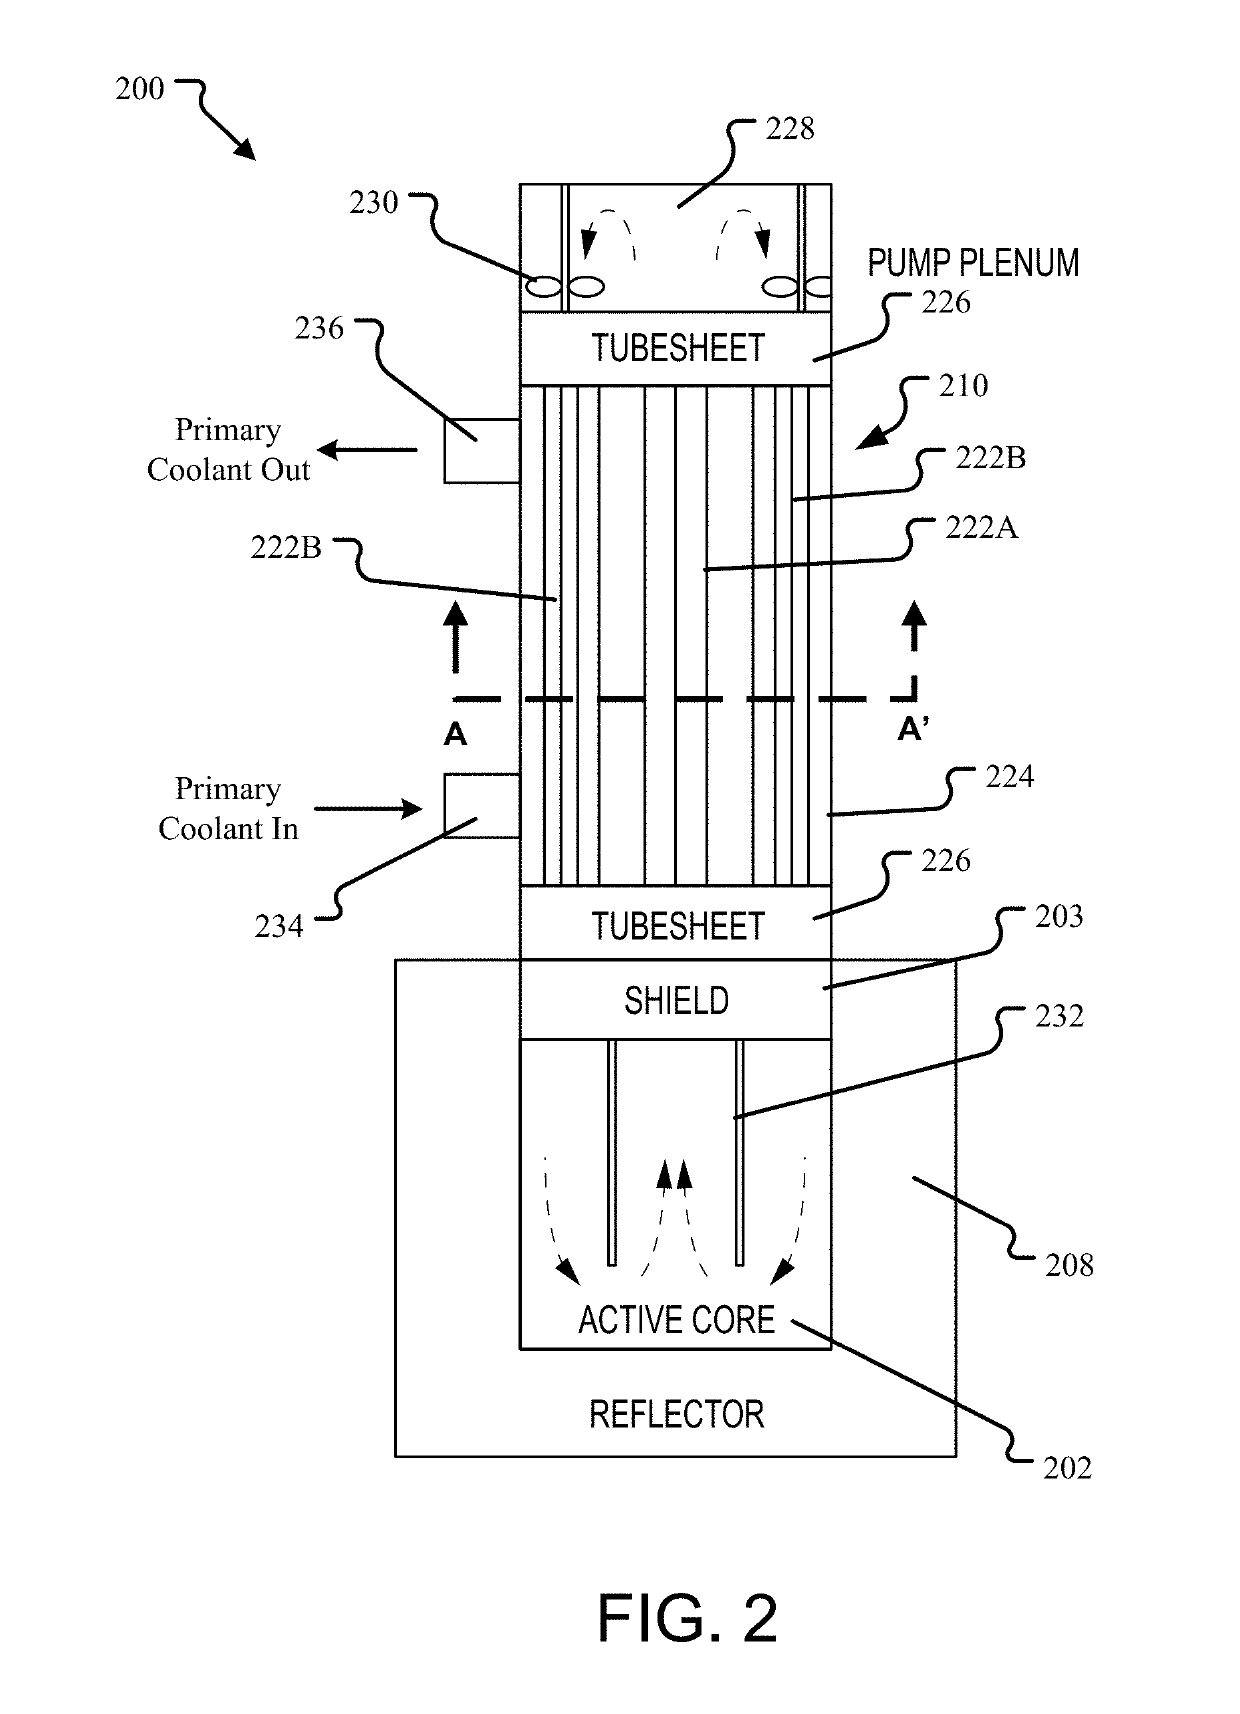 Nuclear reactor configured to have molten fuel pass through plural heat exchangers before returning to core